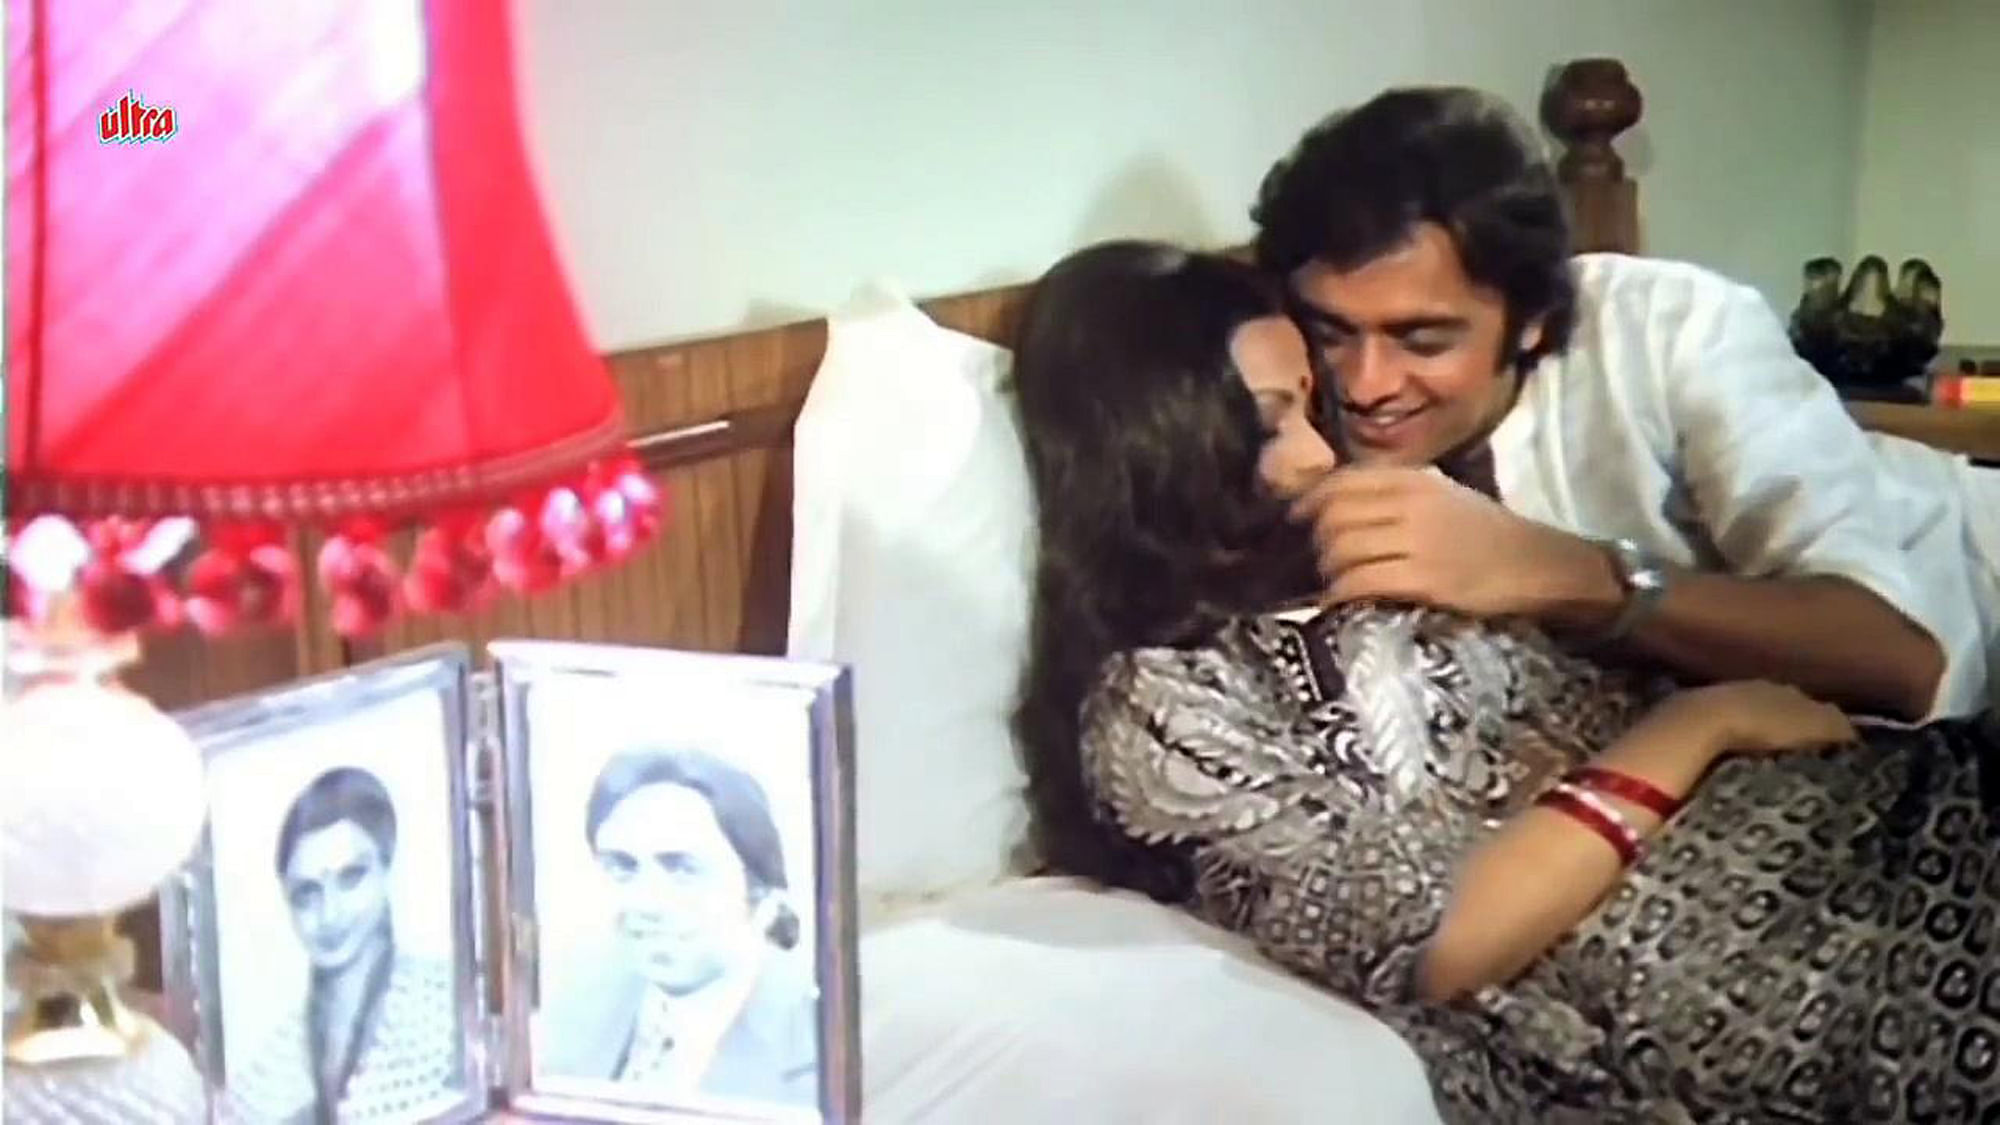 A still from the film Ghar starring Rekha and   Vinod Mehra. (Photo Courtesy:  Khalid Mohamed’s Collection)